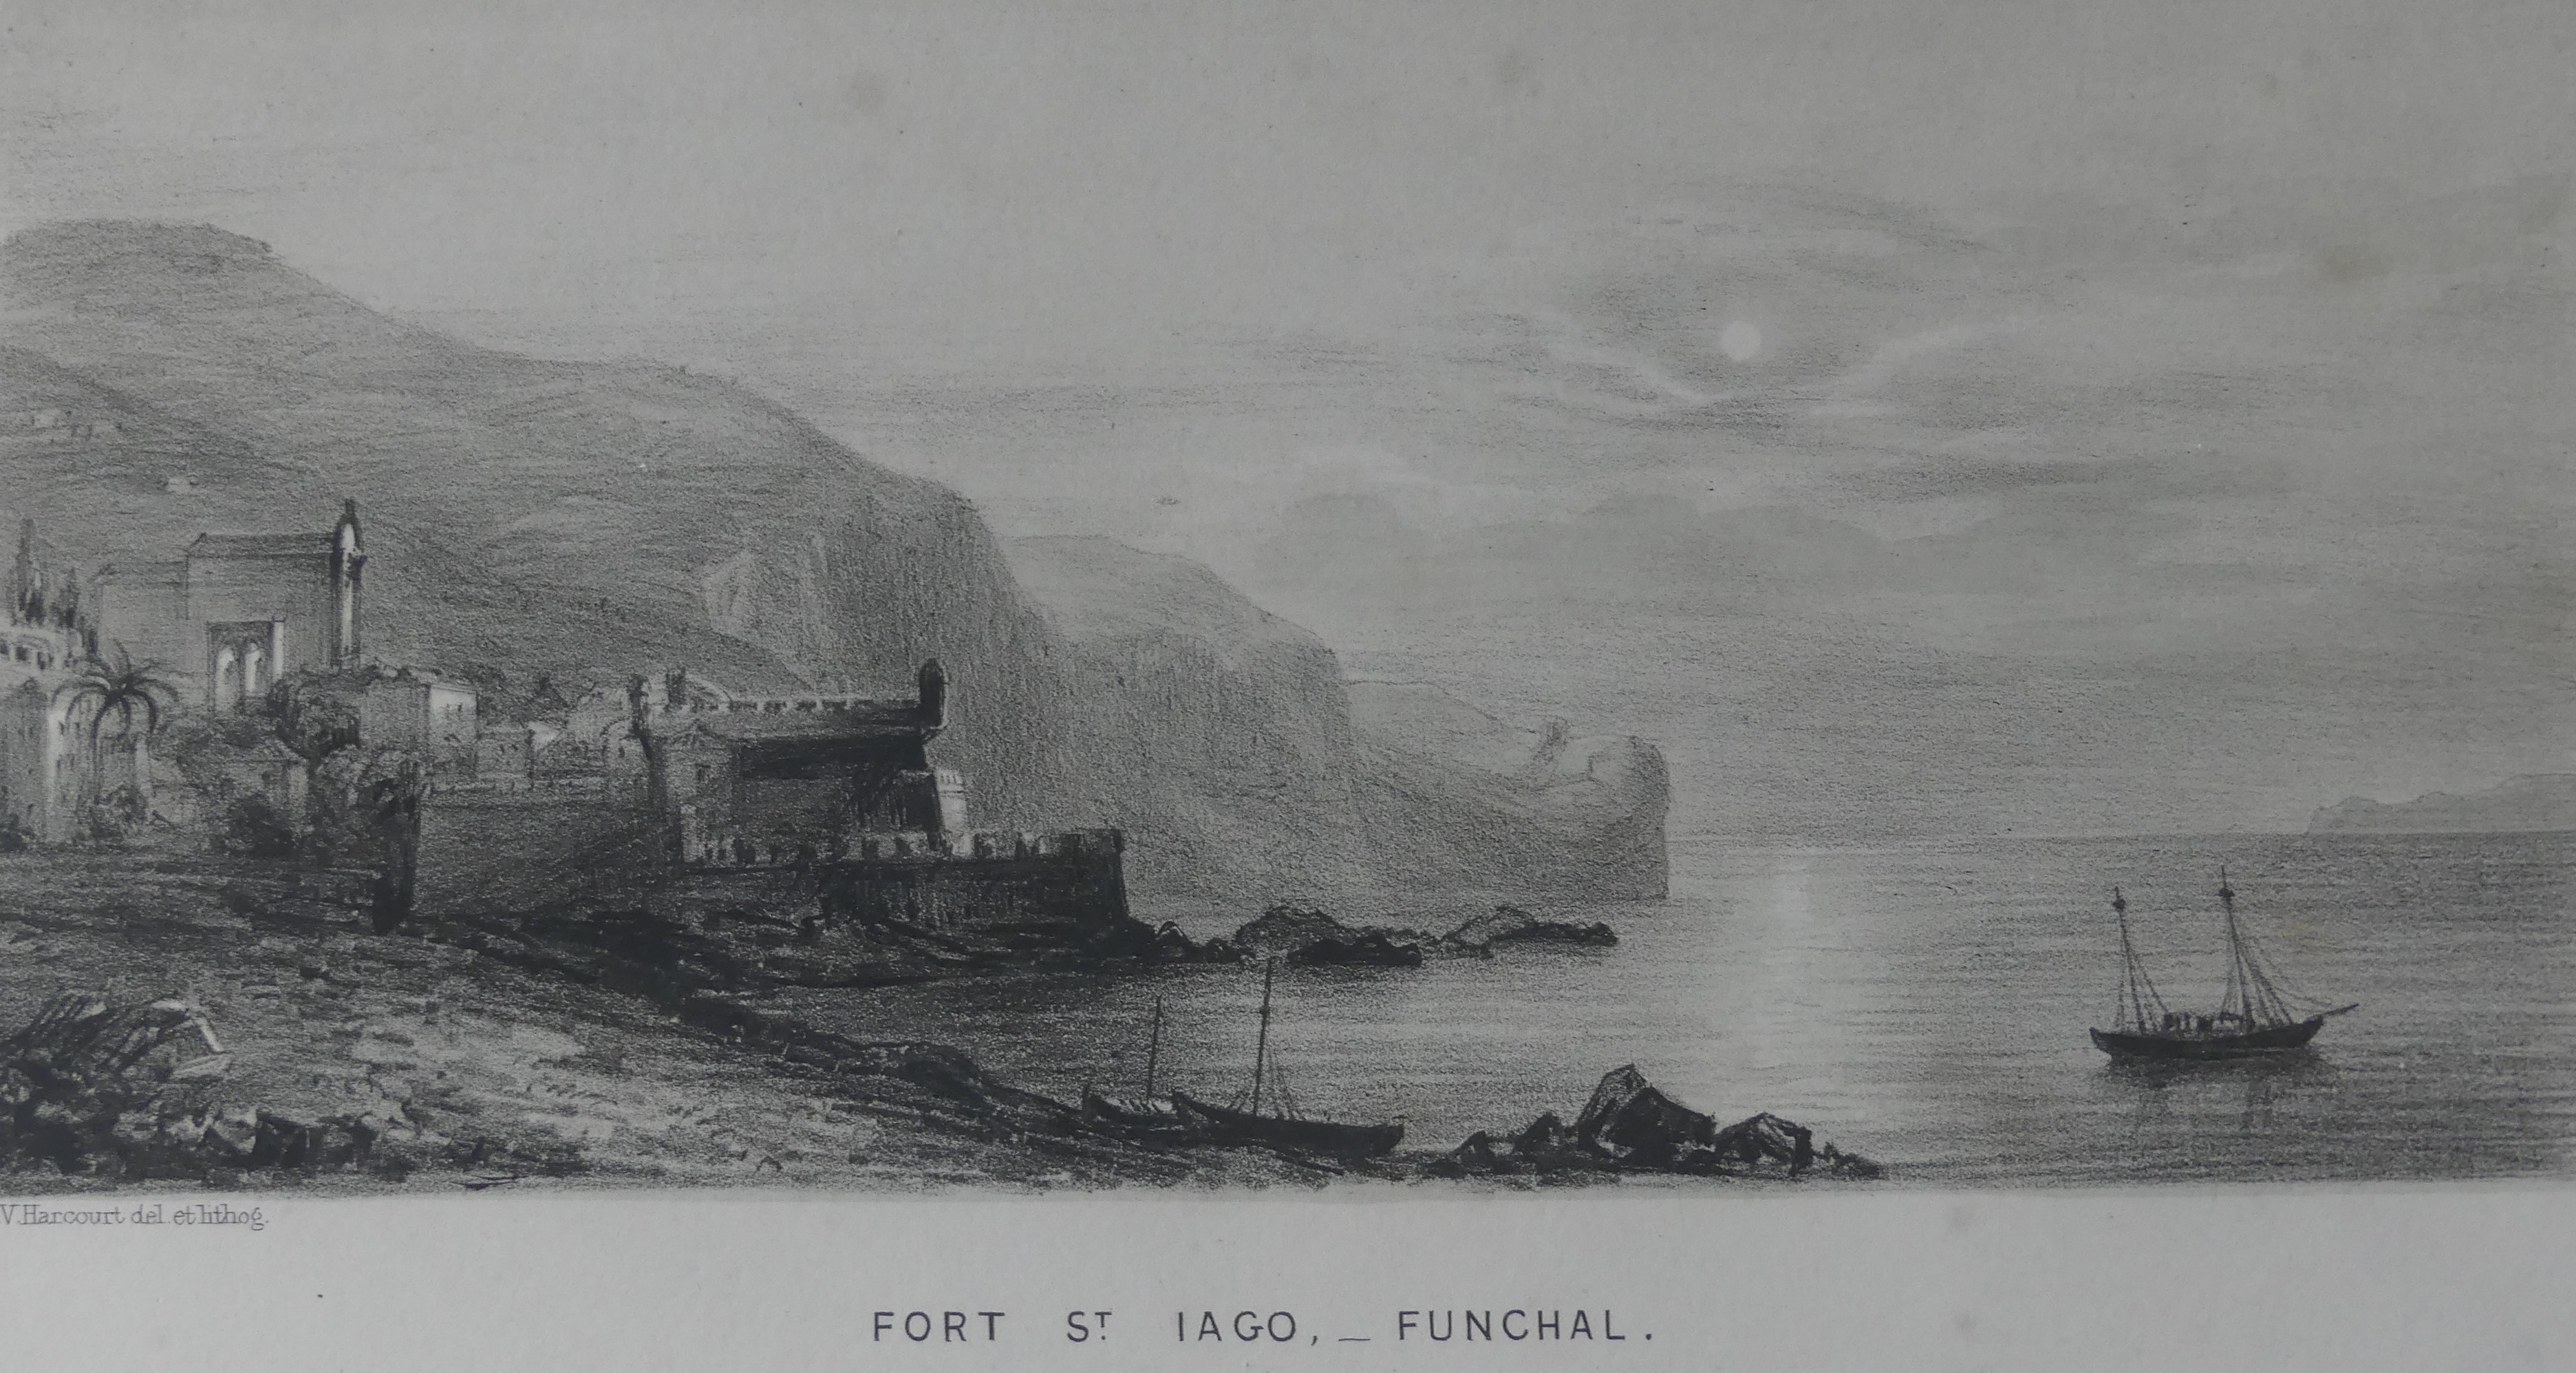 Fort St Tiago, Restaurant do Forte Funchal Madeira (Picture is displayed in Quinta do Penha)